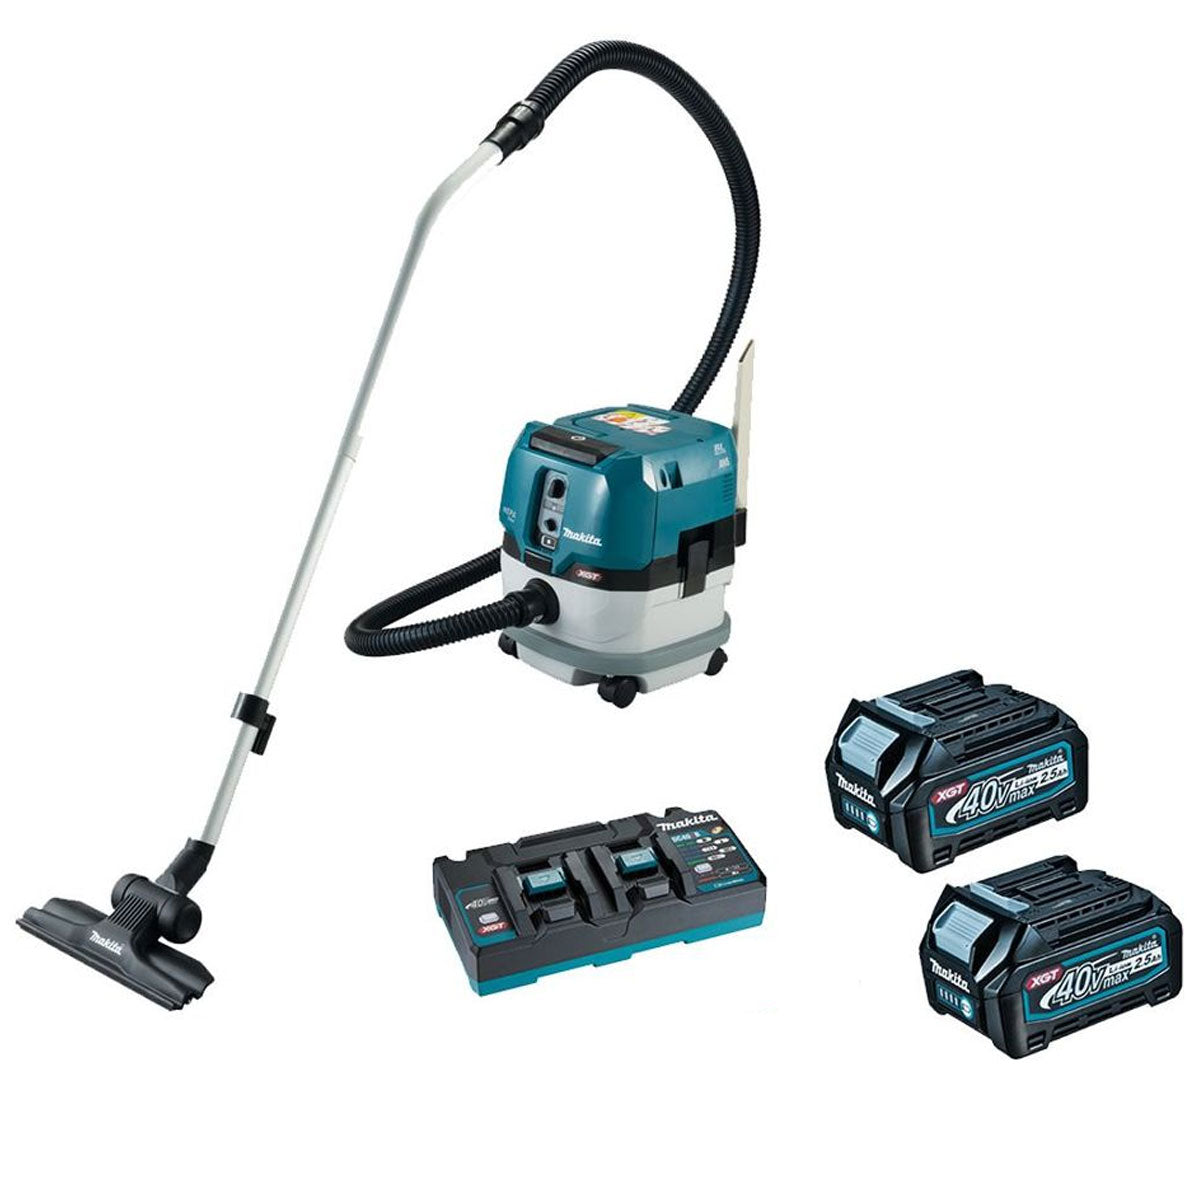 Makita VC002GLD22 40V XGT Brushless L-Class Dust Extractor With 2 x 2.5Ah Battery & Charger